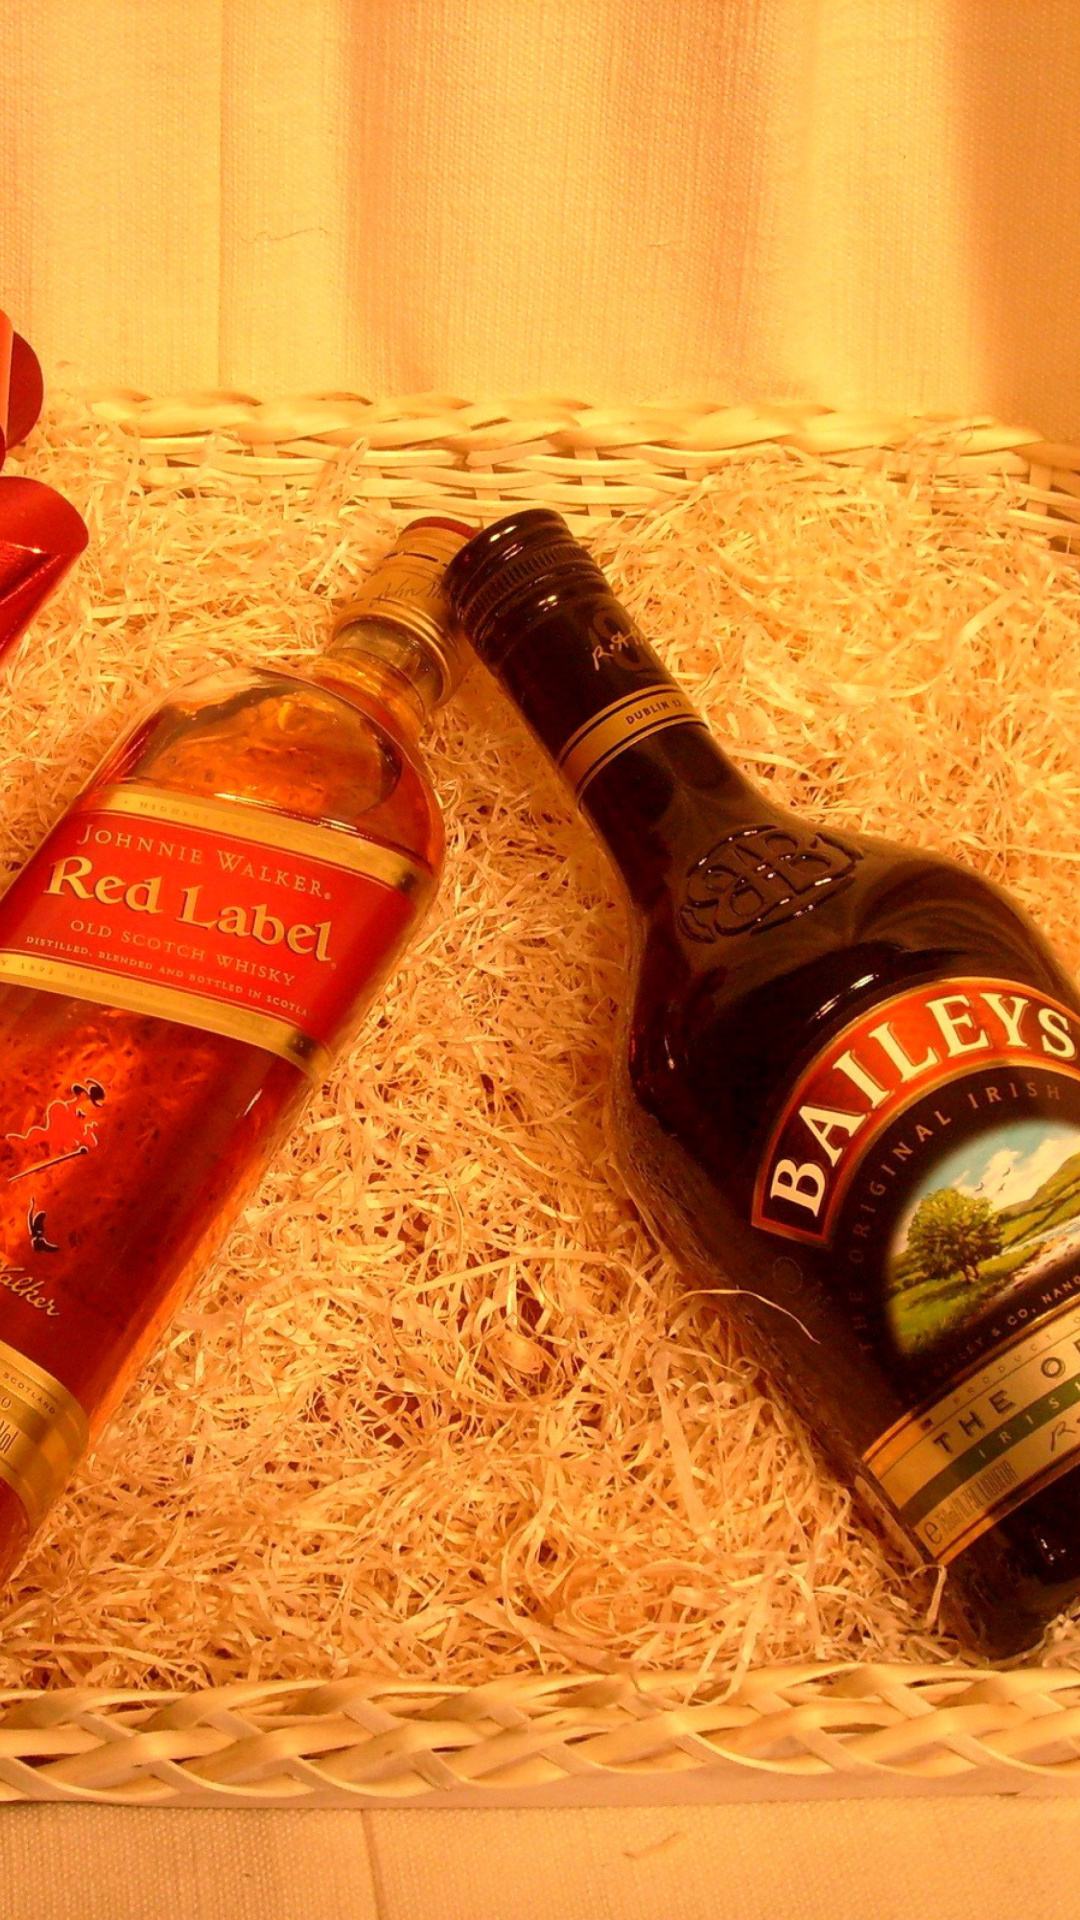 Baileys and Red Label screenshot #1 1080x1920